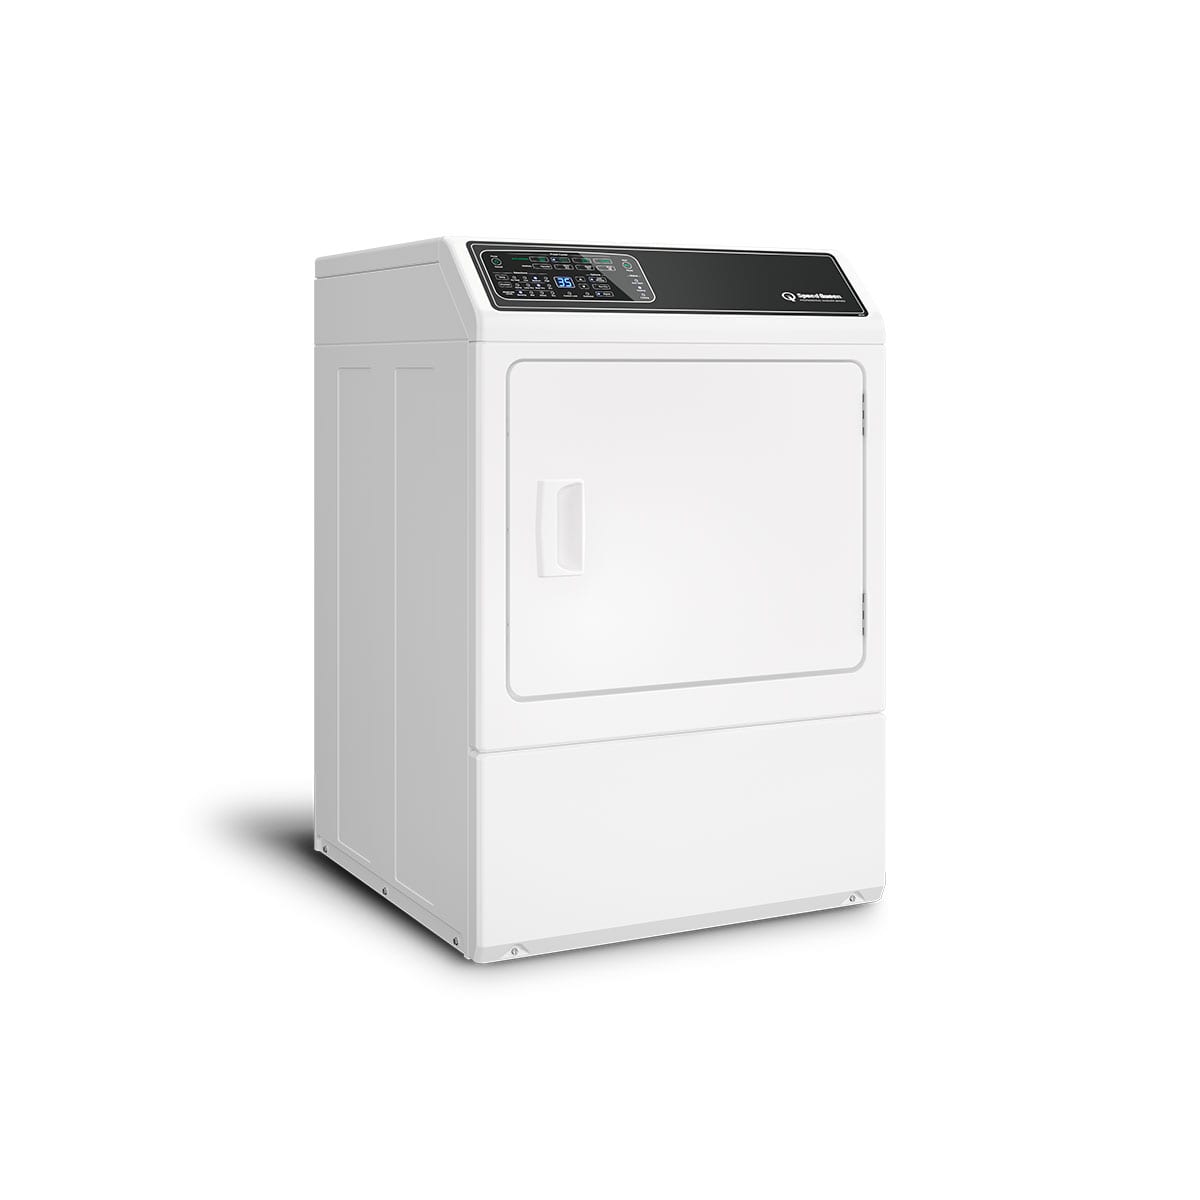 What Are Some Good Features Of Speed Queen Washers And Dryers?